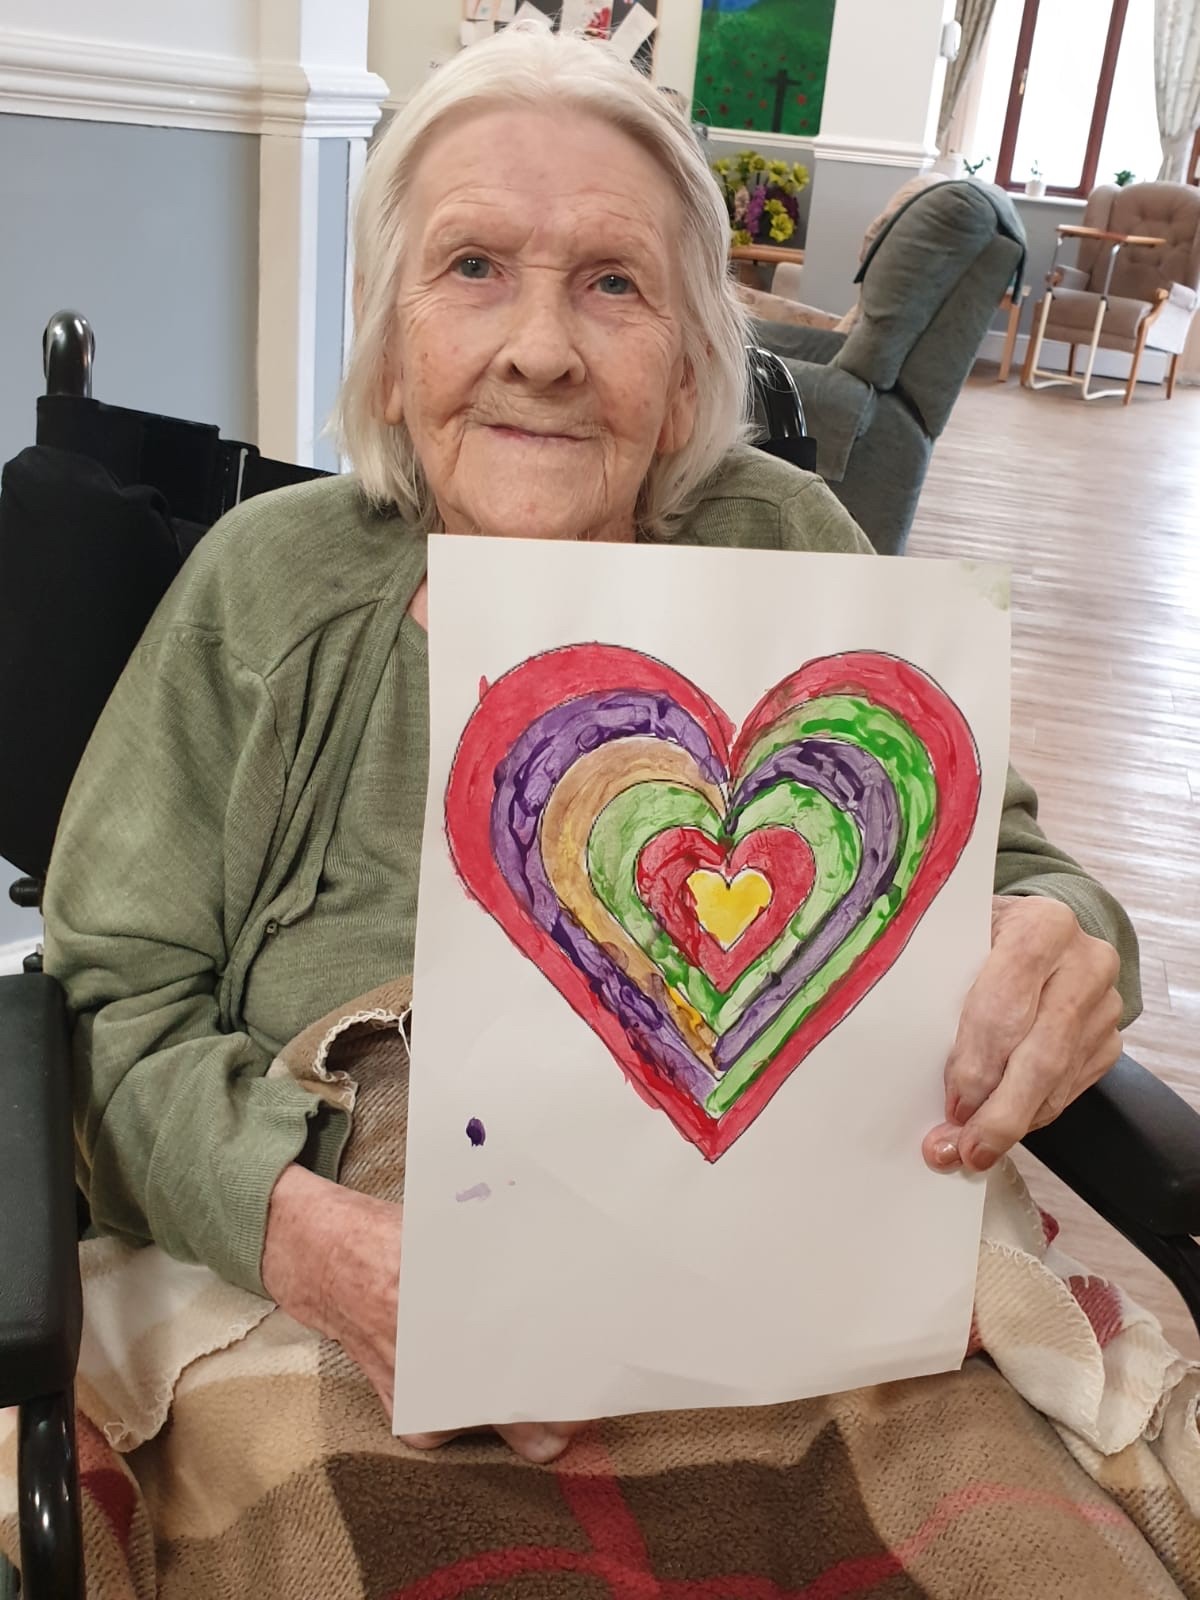 Valentines Crafts The Firs Care Home in Taunton, the heart of Somerset